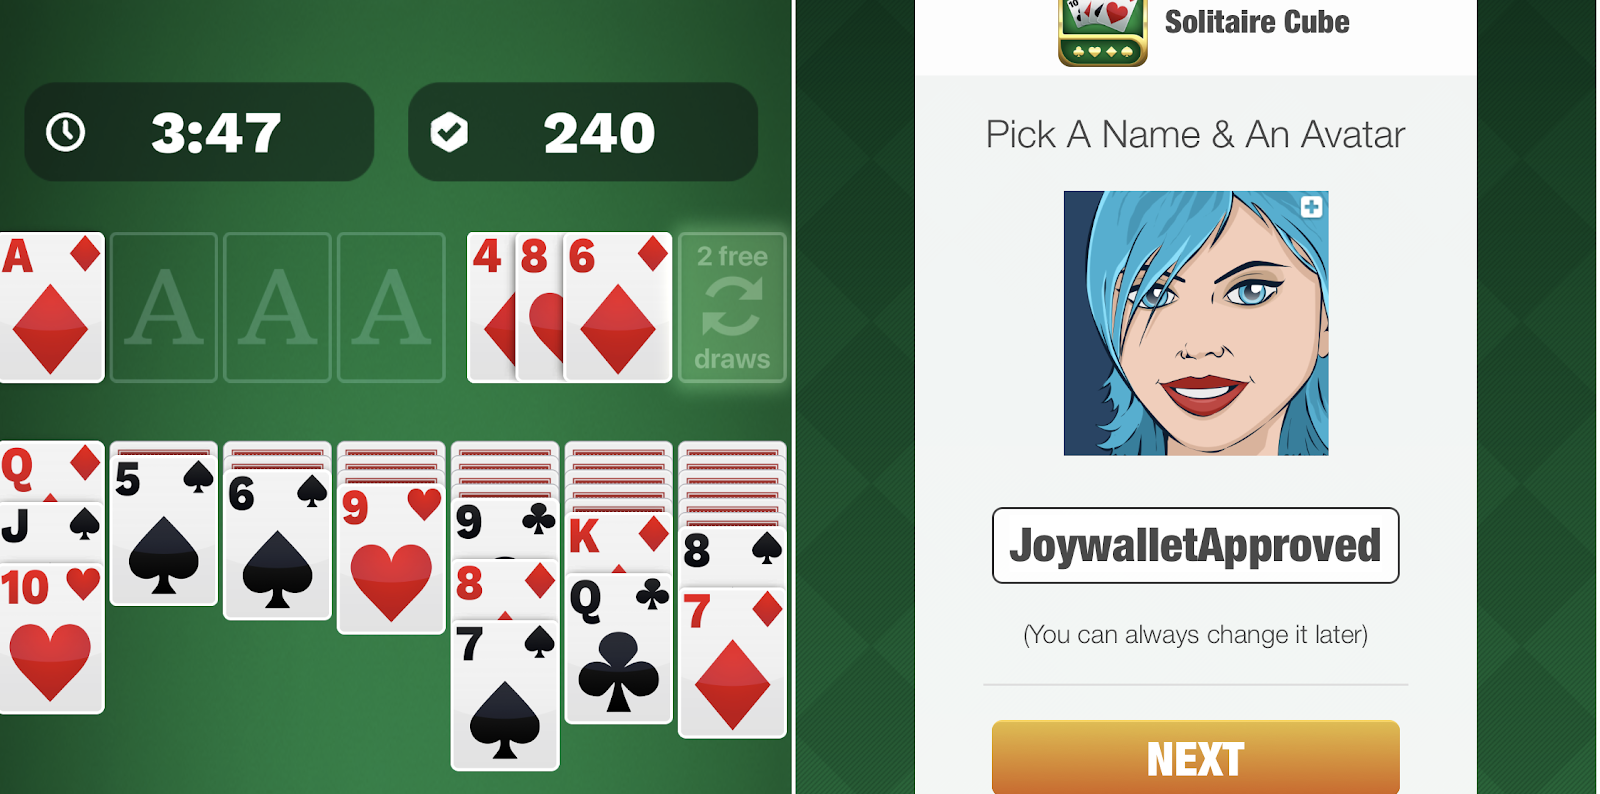 solitaire cube win real money download